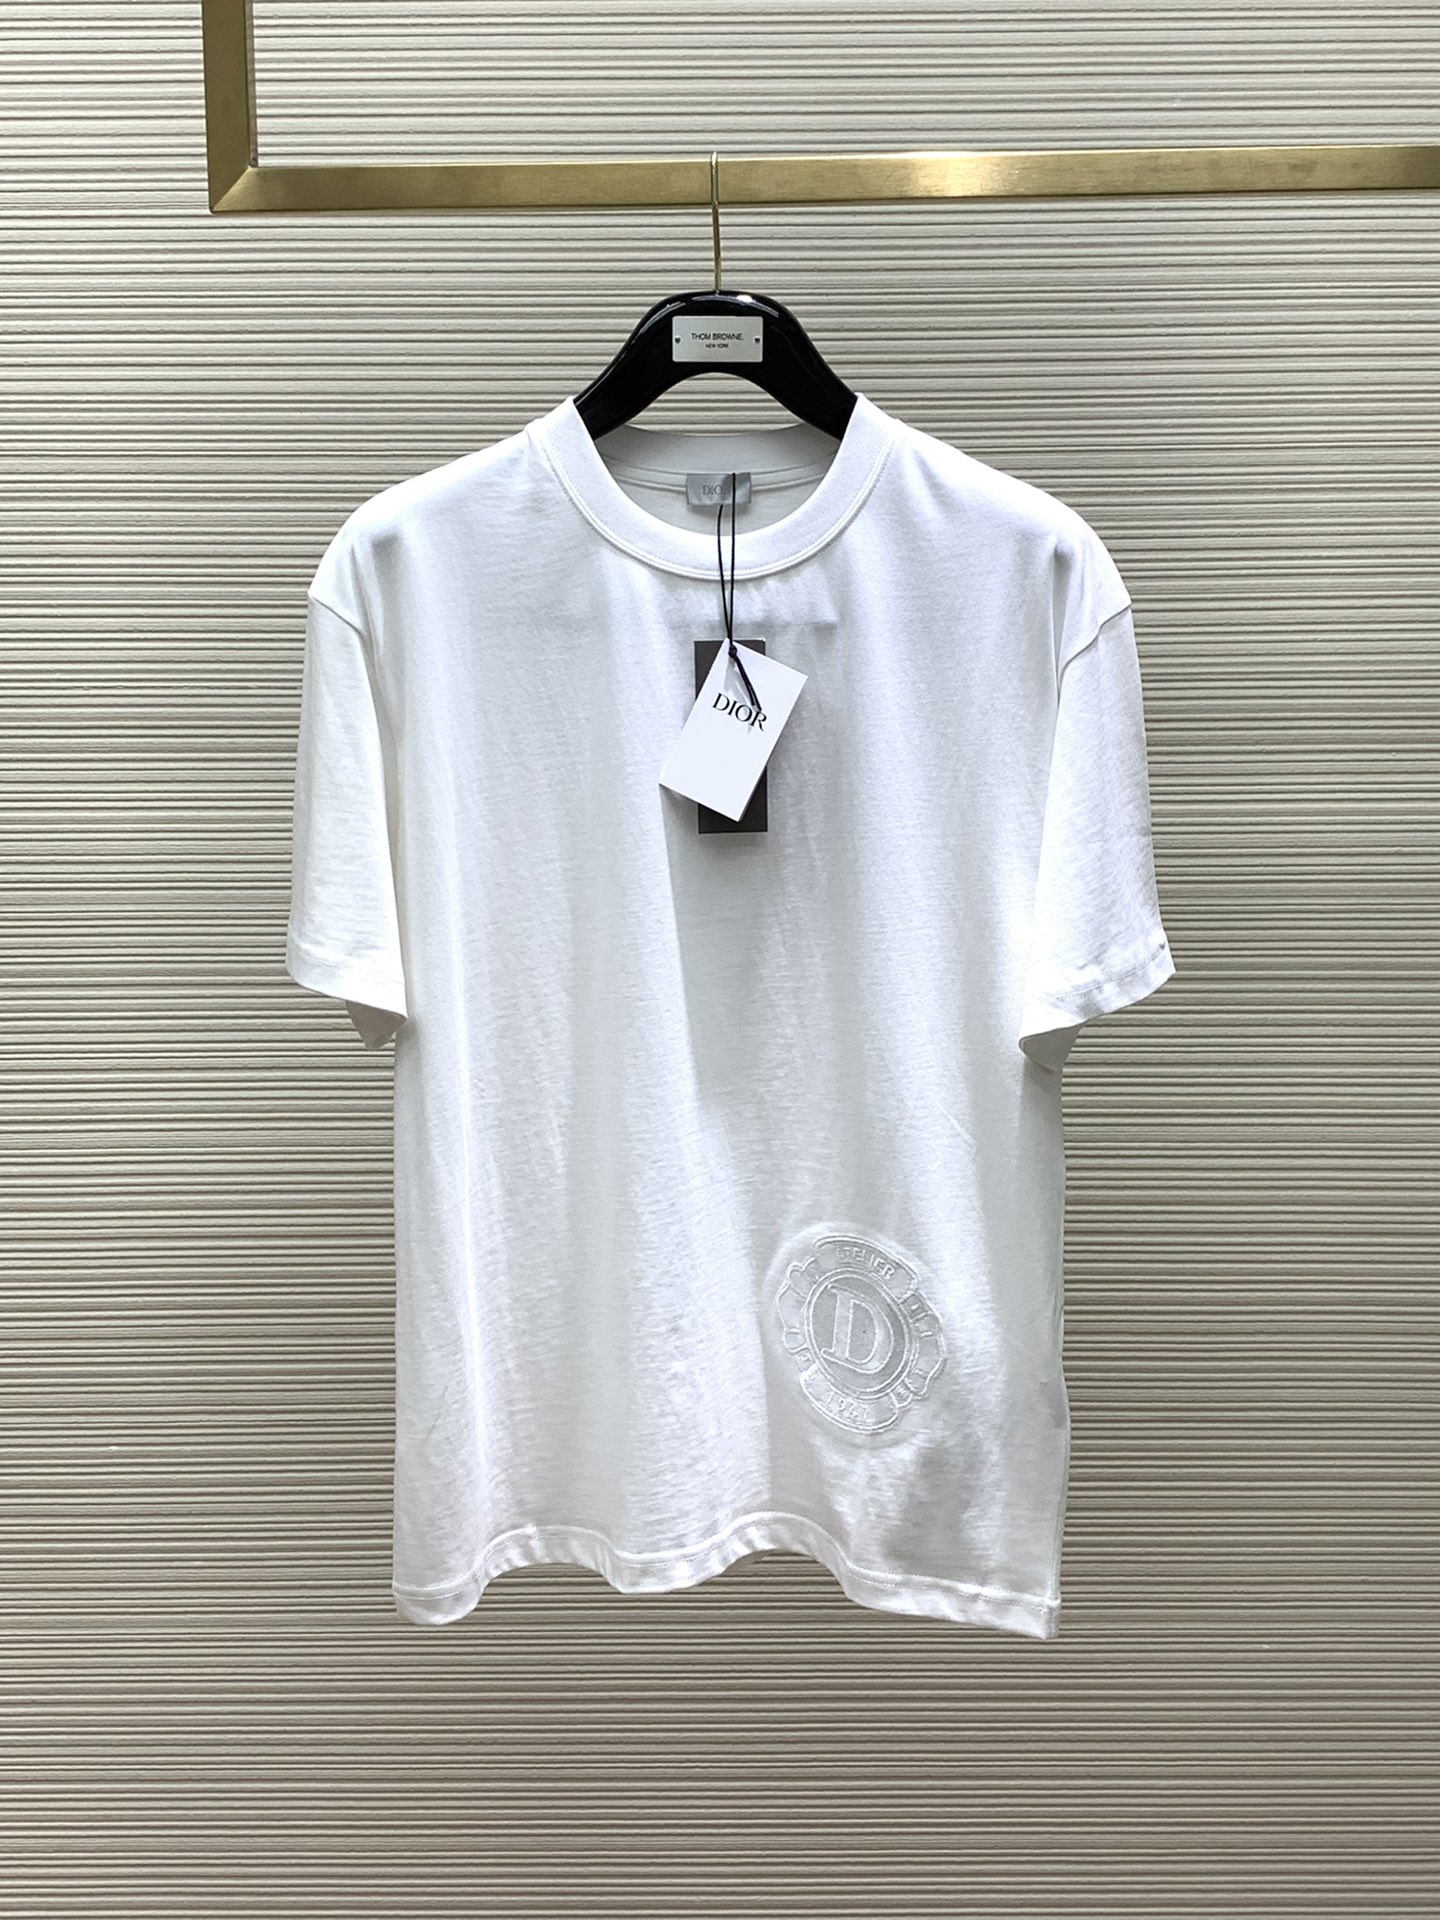 Dior Clothing T-Shirt Embroidery Summer Collection Fashion Short Sleeve